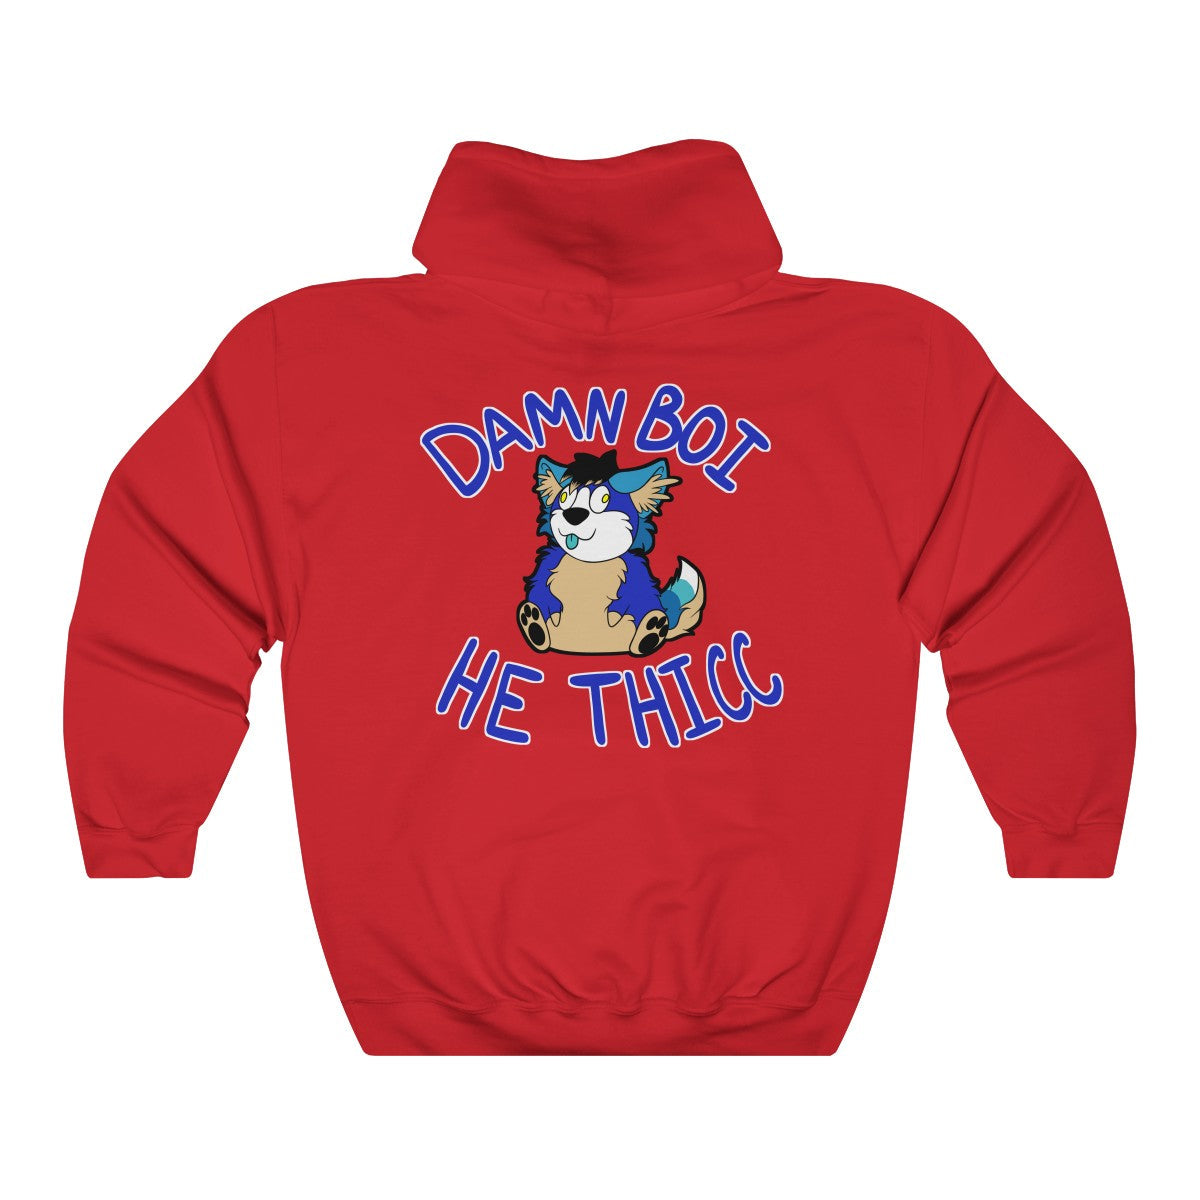 Thicc Boi With Text - Hoodie Hoodie AFLT-Hund The Hound Red S 